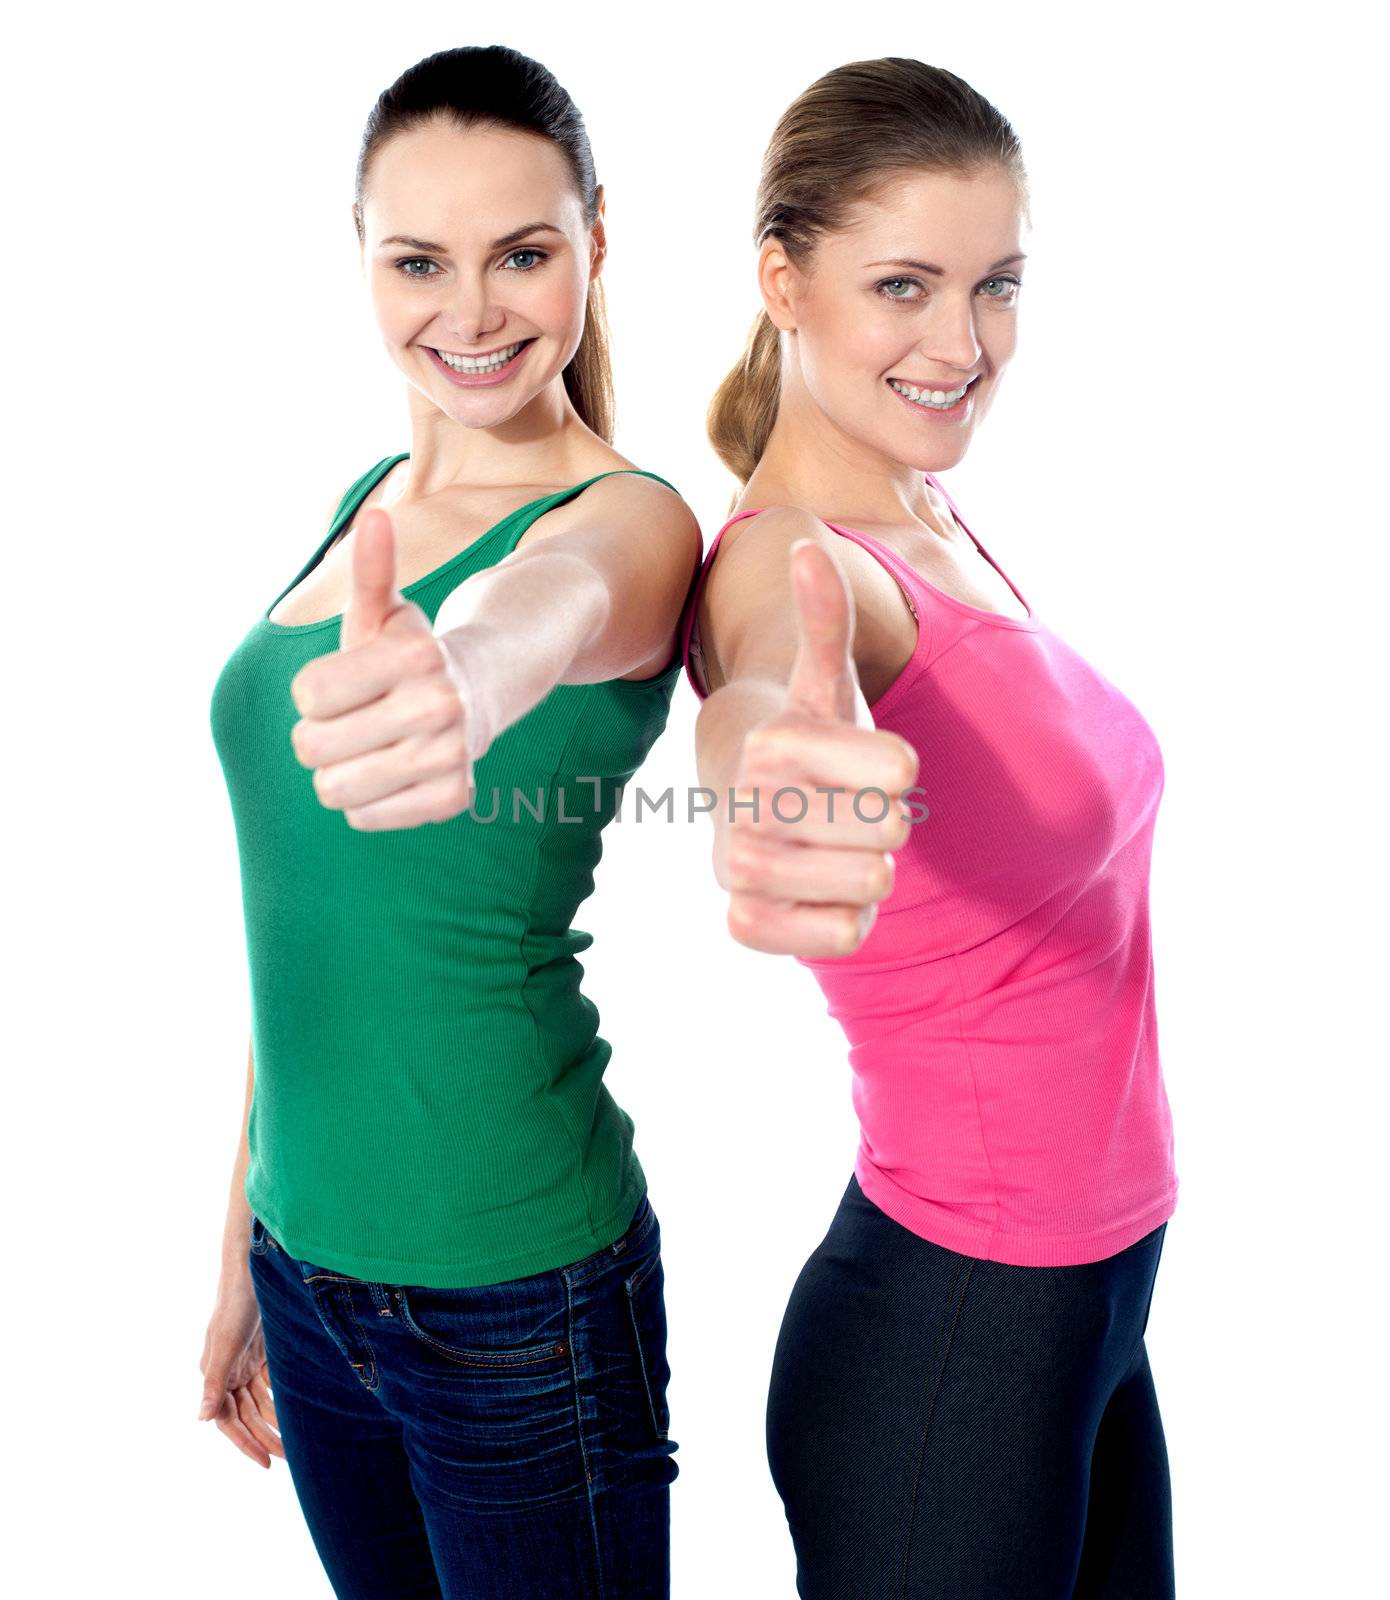 Smiling pretty girls gesturing thumbs-up by stockyimages